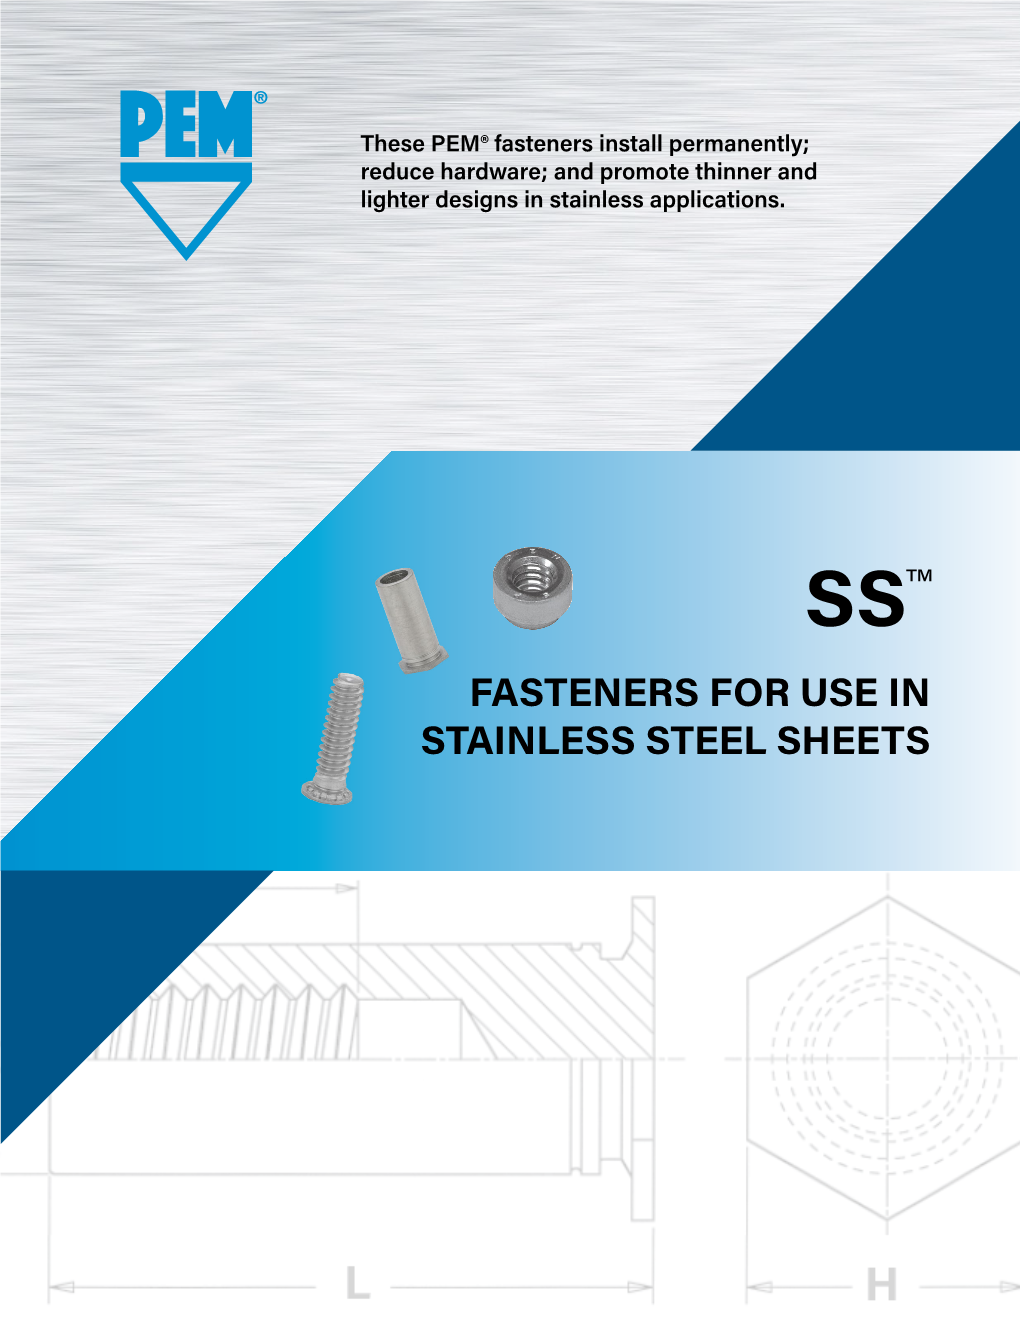 Fasteners for Use in Stainless Steel Sheets Fasteners for Use in Stainless Steel Sheets